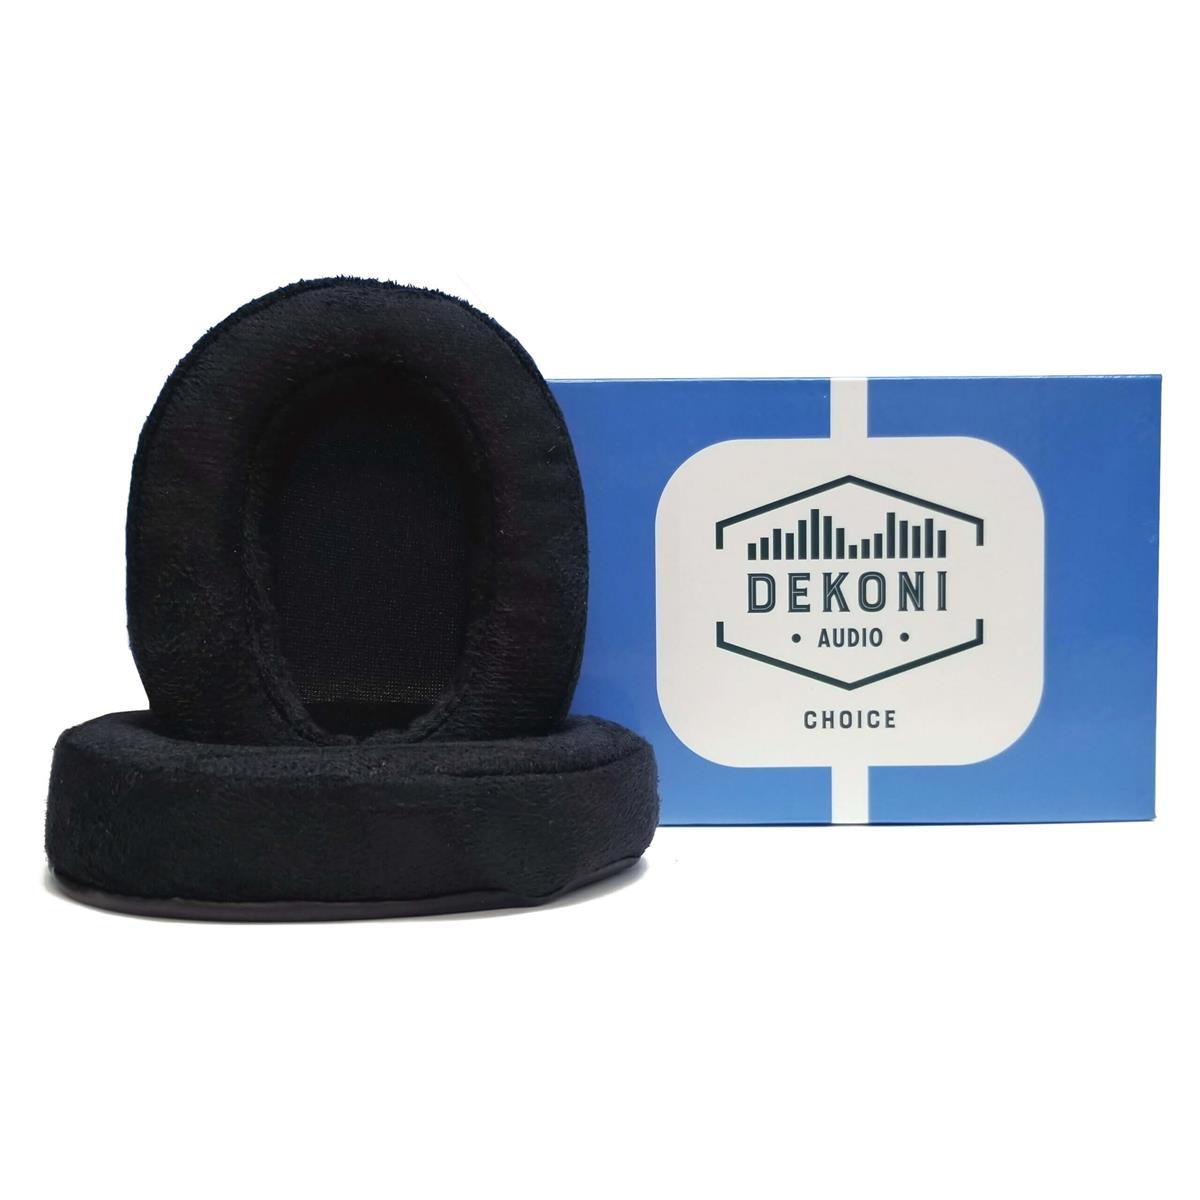 Image of Dekoni Audio Choice Suede Replacement Ear Pads for AKG K371 Headphones